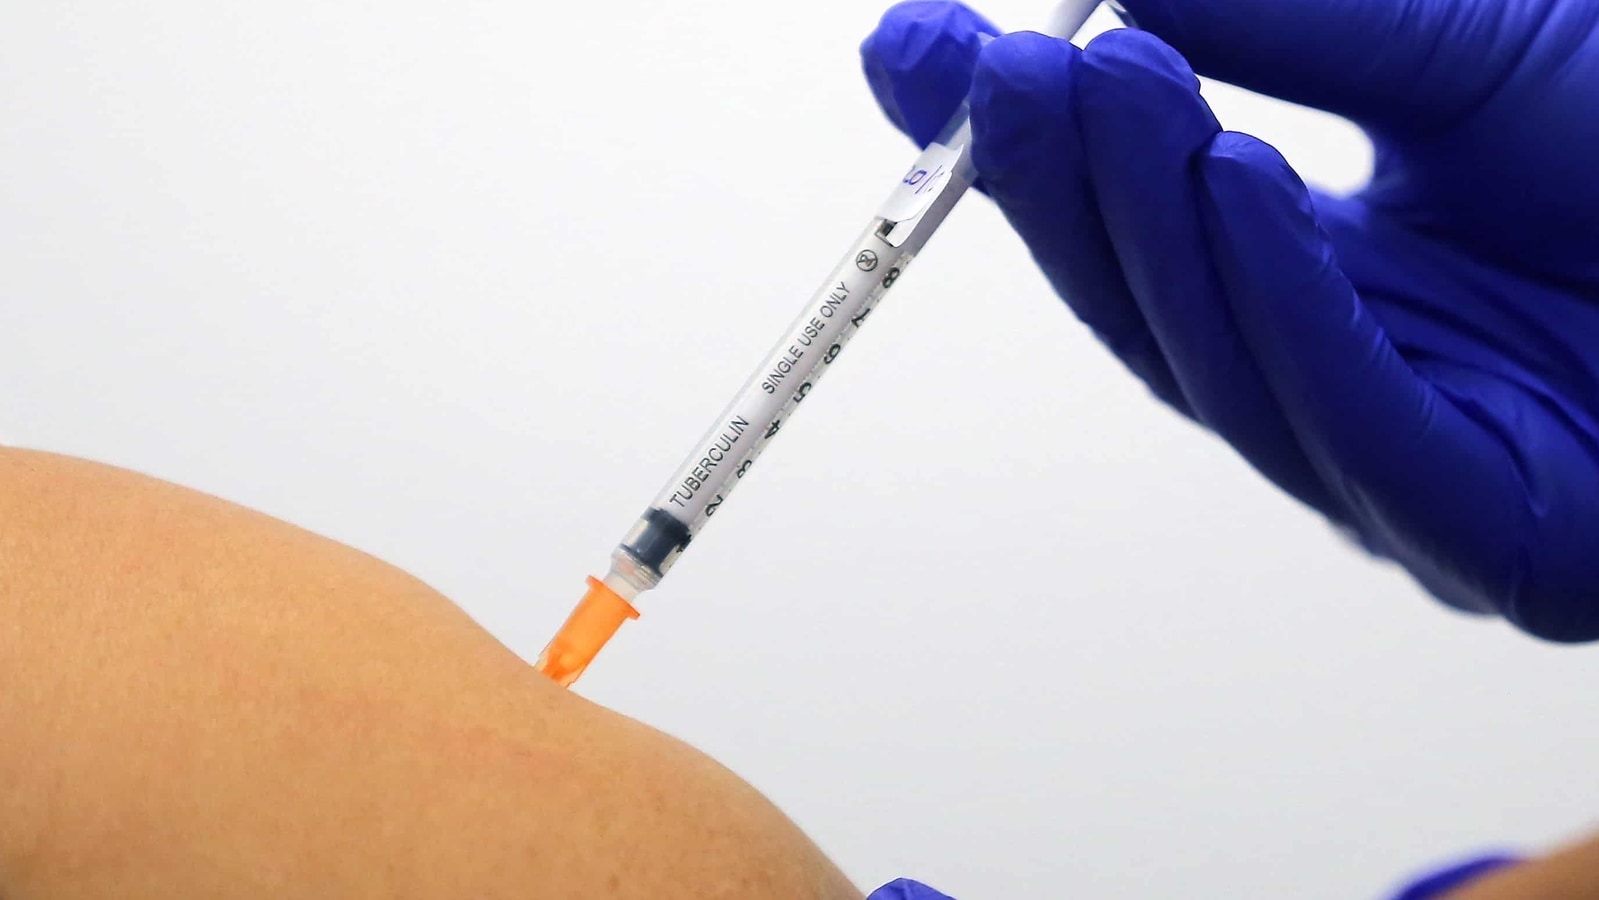 A rapid rollout of the Covid-19 vaccine backfired in some US states